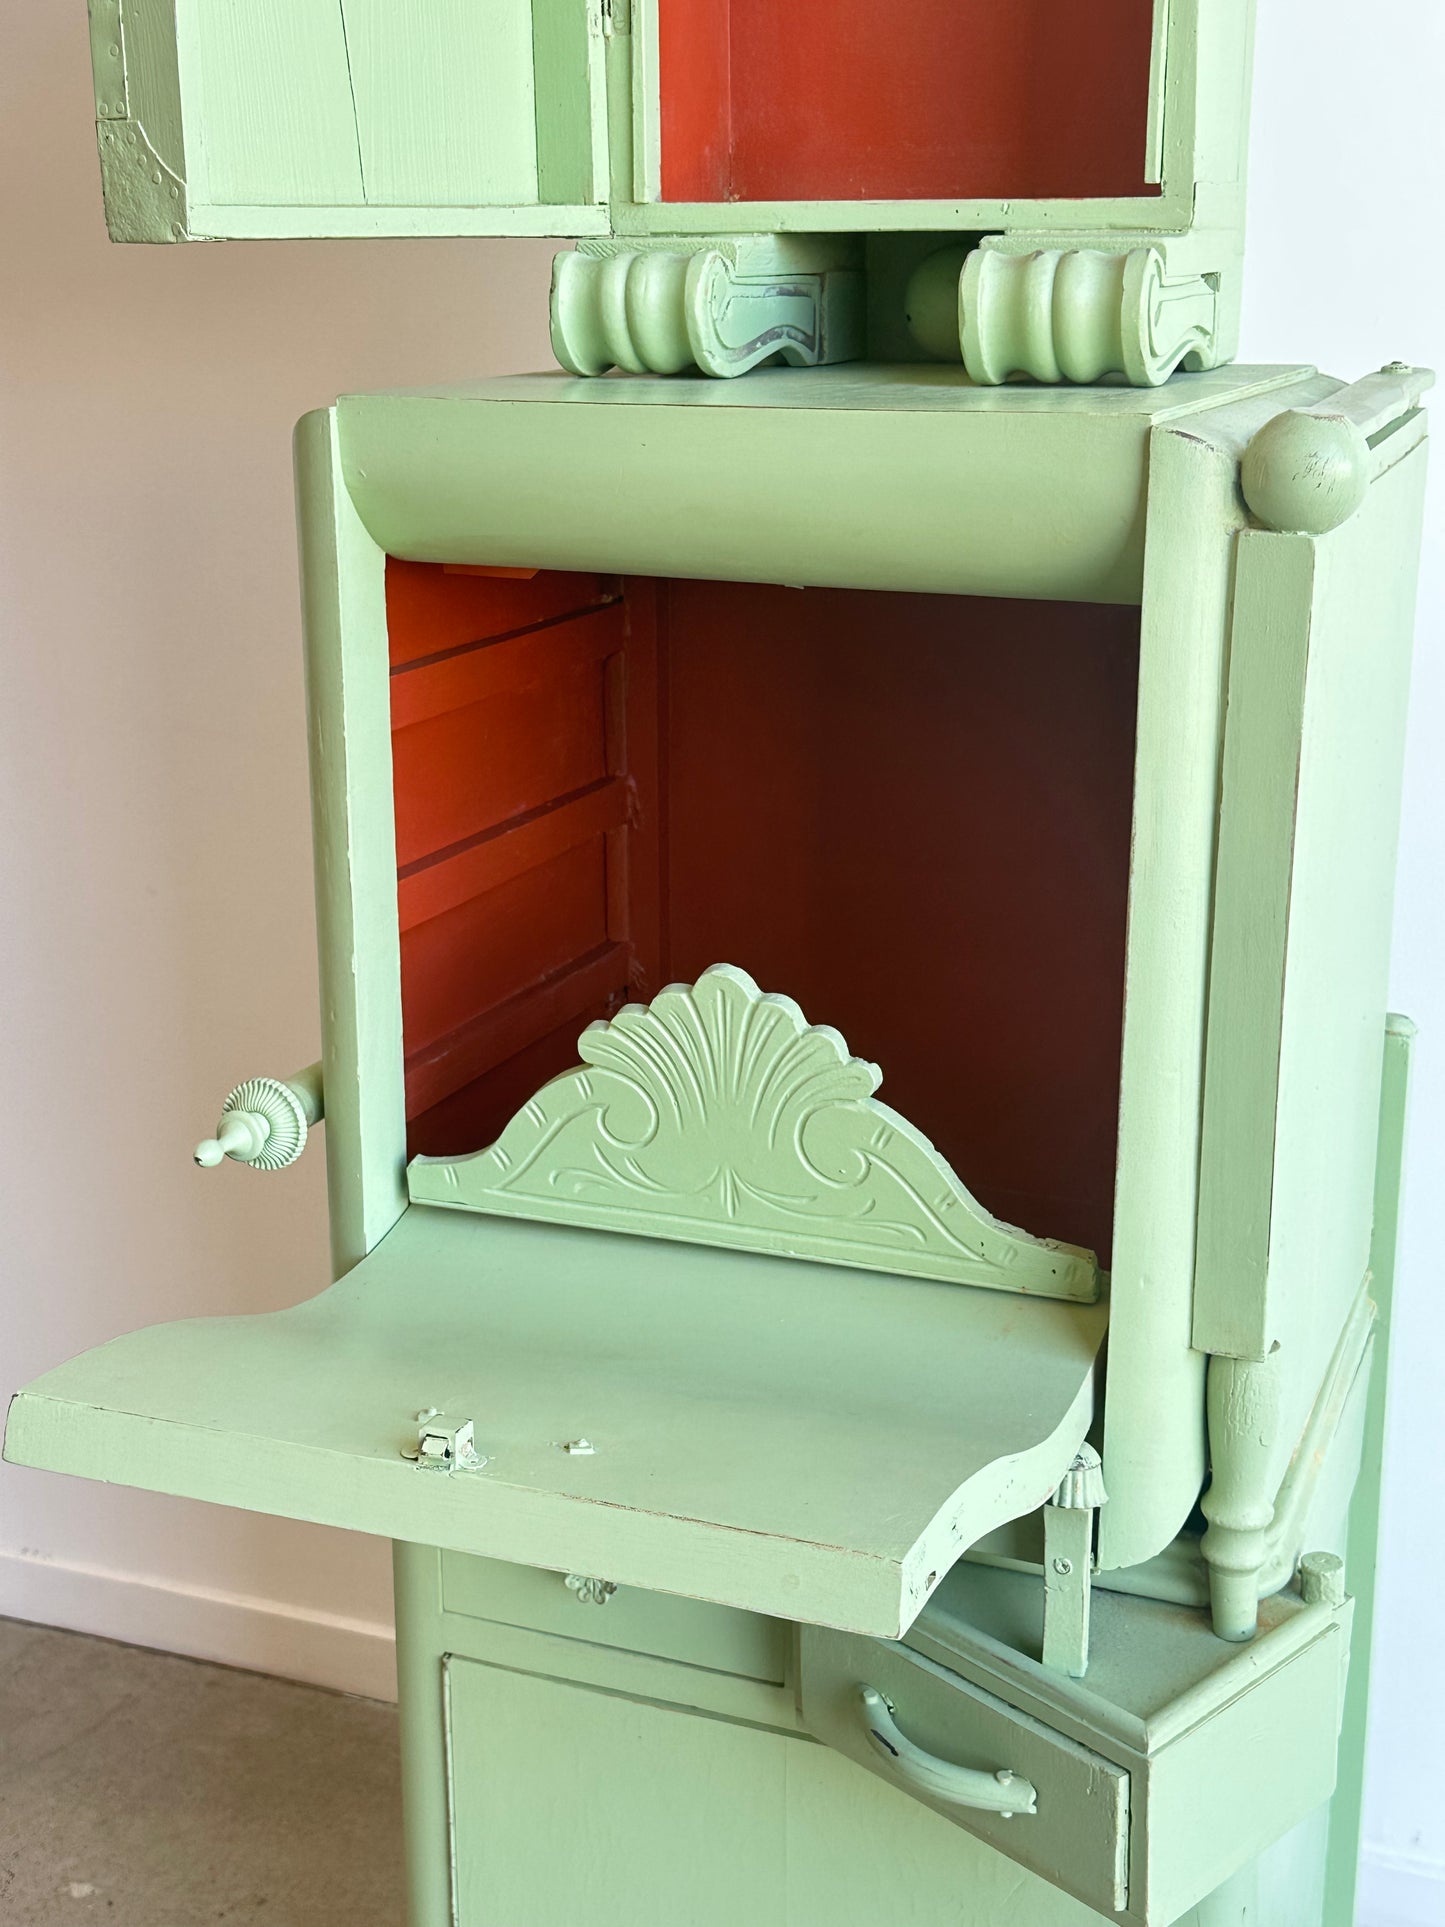 Cabinet Contemporary Light Green Functional Sculpture by Paolo Lumini, Tuscany Italy